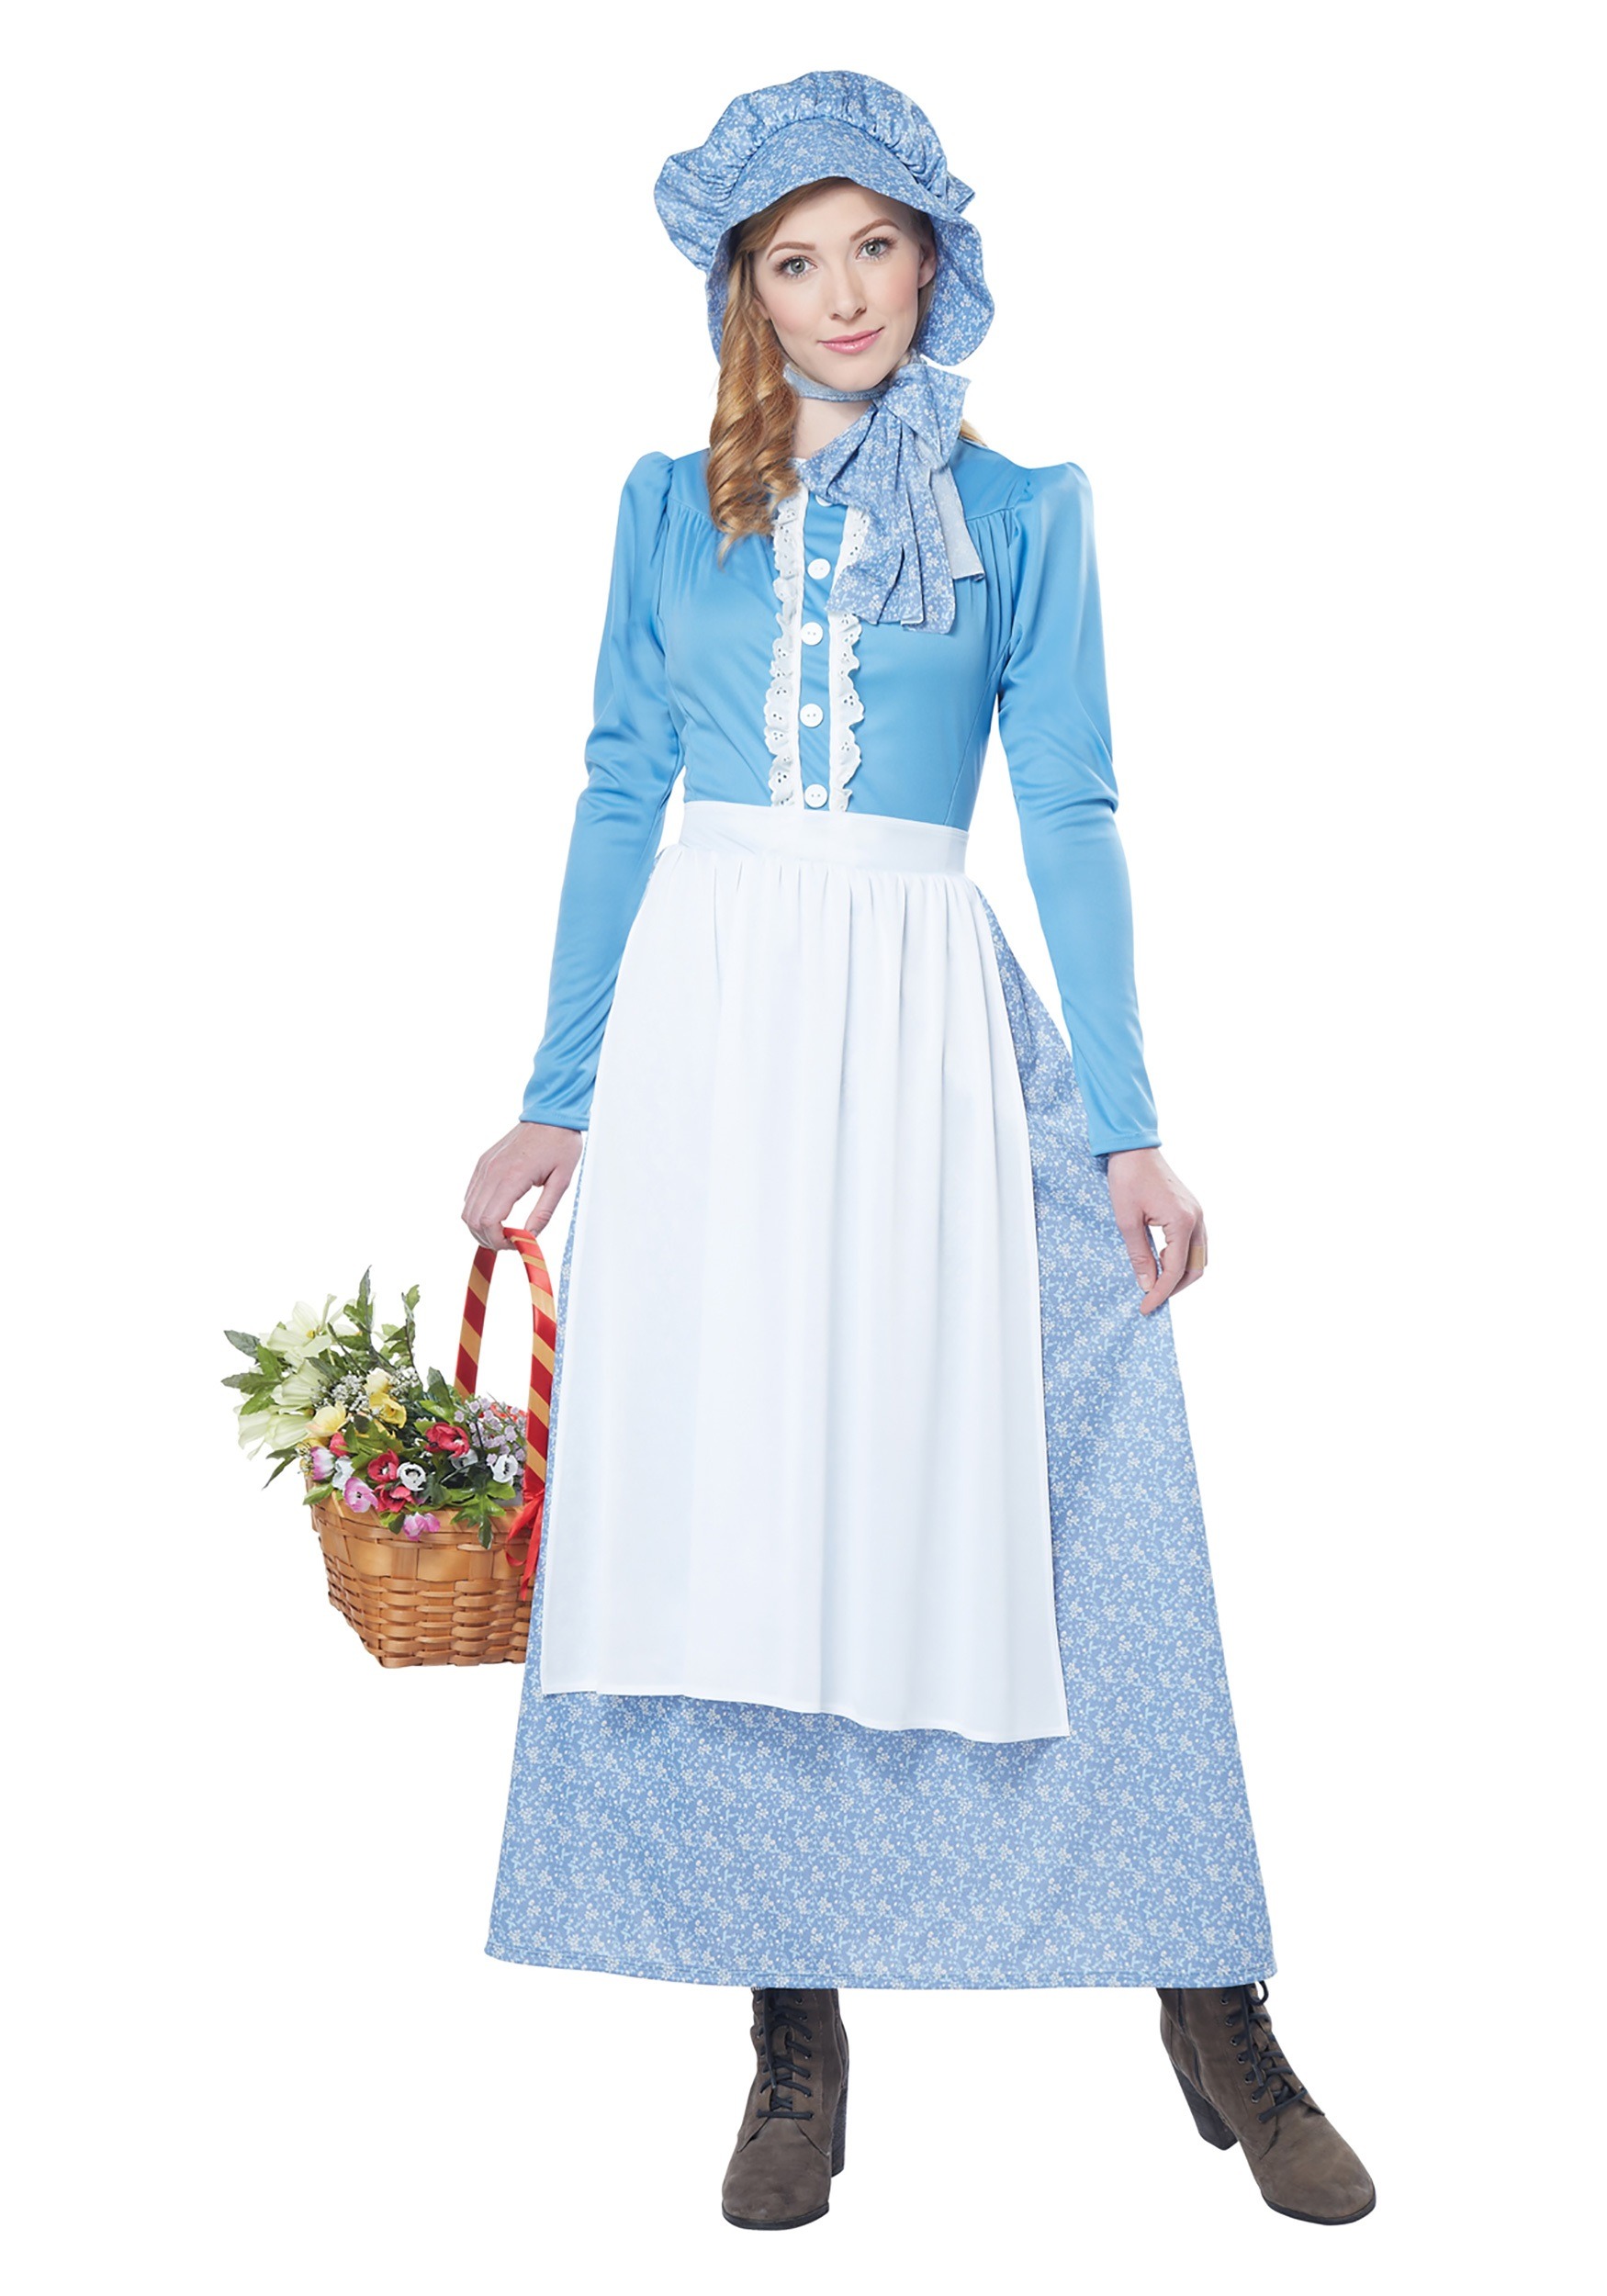 https://images.halloweencostumes.com/products/39932/1-1/adult-pioneer-woman-costume.jpg